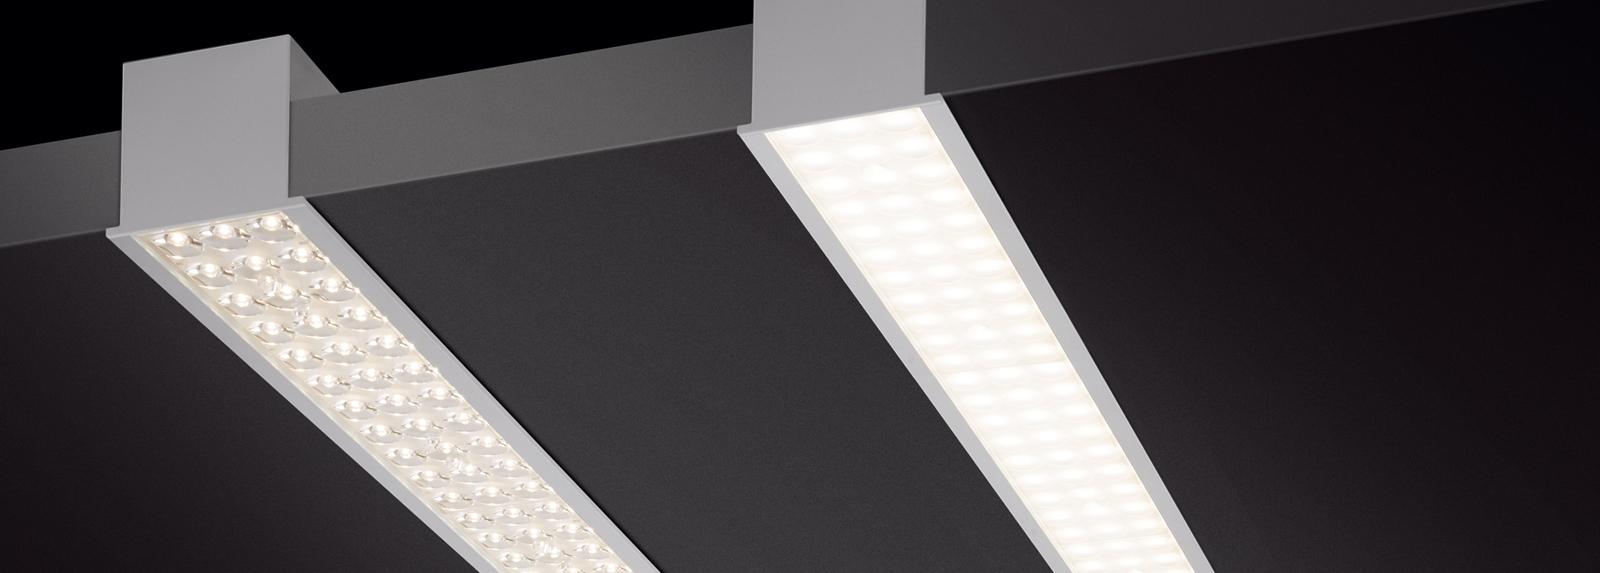 GOWEL 100 | Downlights lineales empotrables